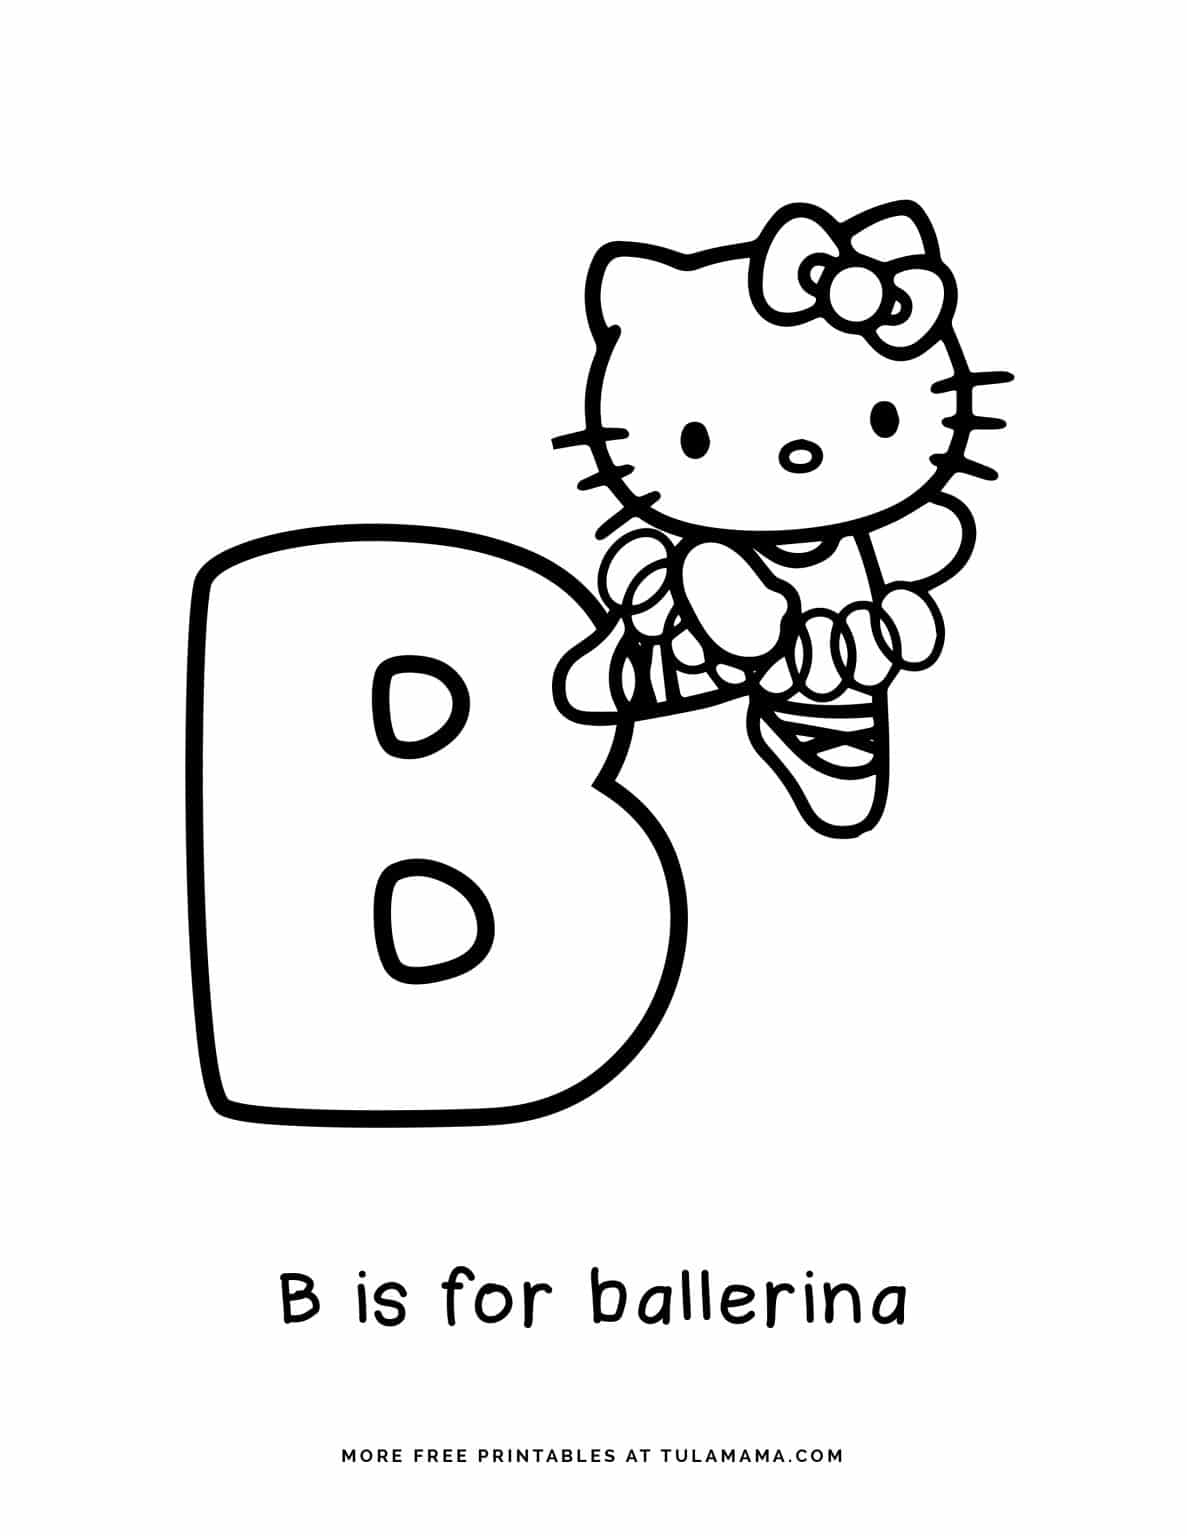 Free Hello Kitty Printables And ABC Coloring Pages - Tulamama